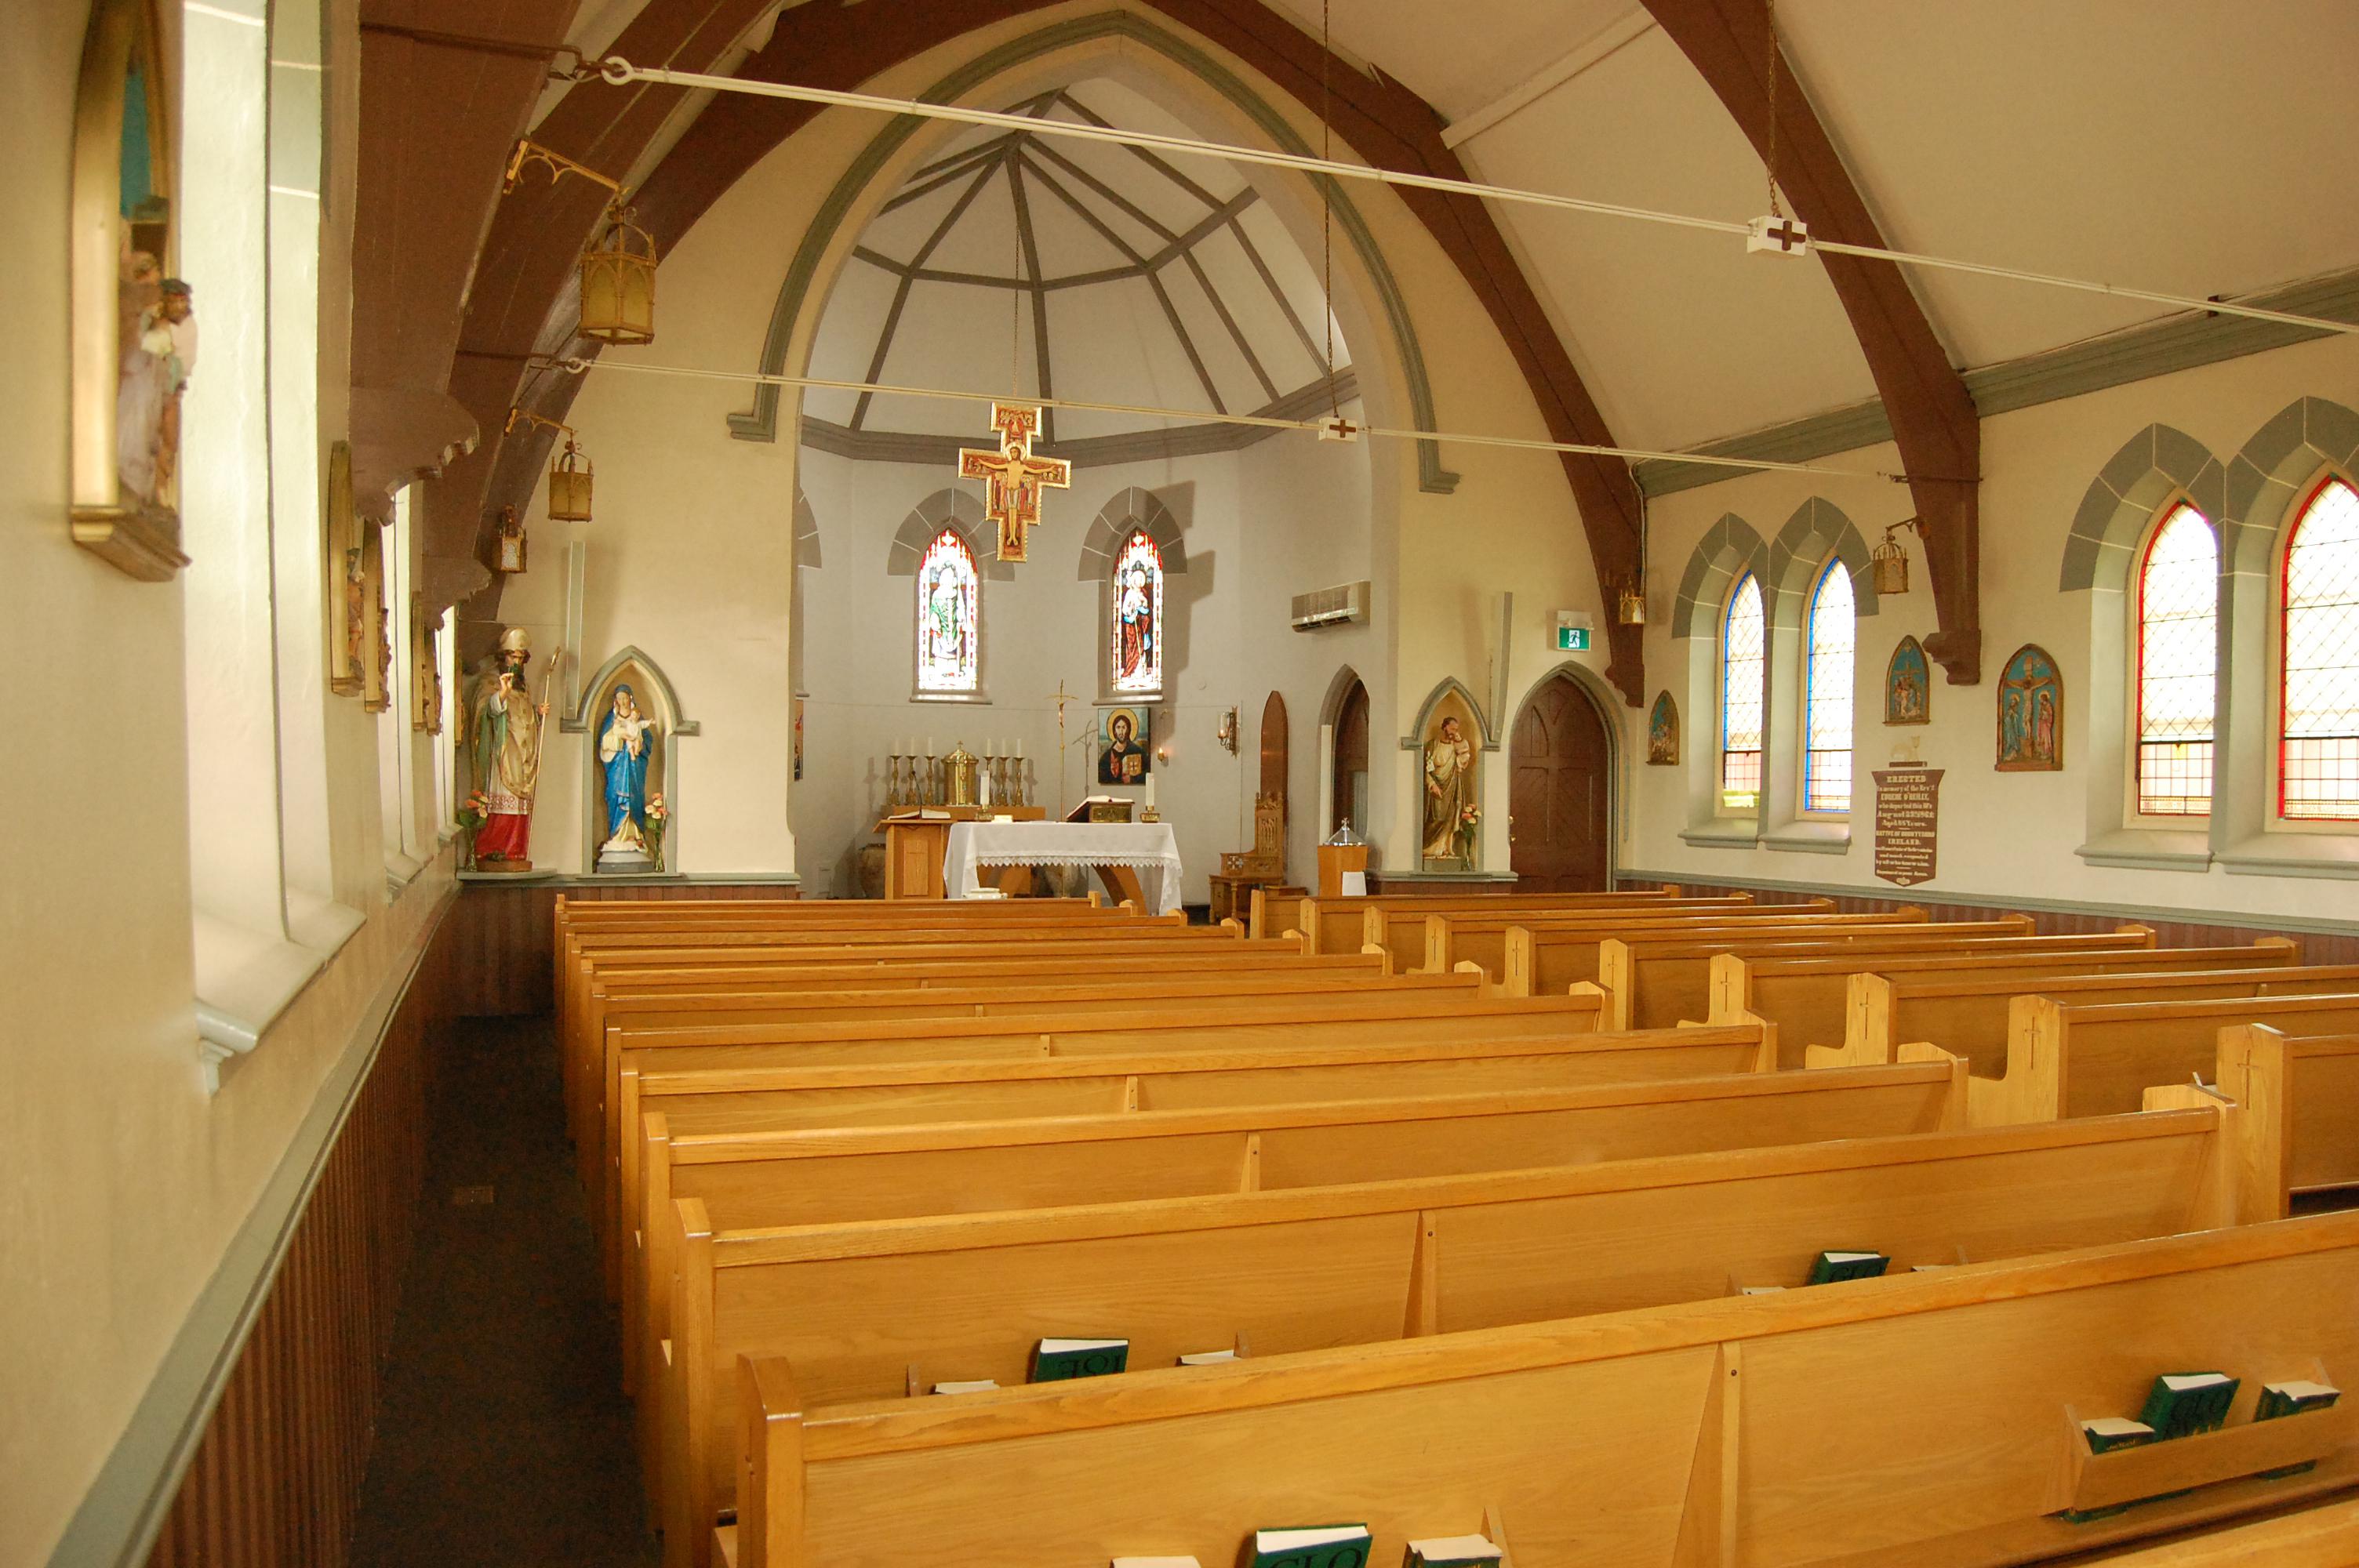 Image of inside Saint Patrick's Church with green tape to identify where people can sit during a pandemic